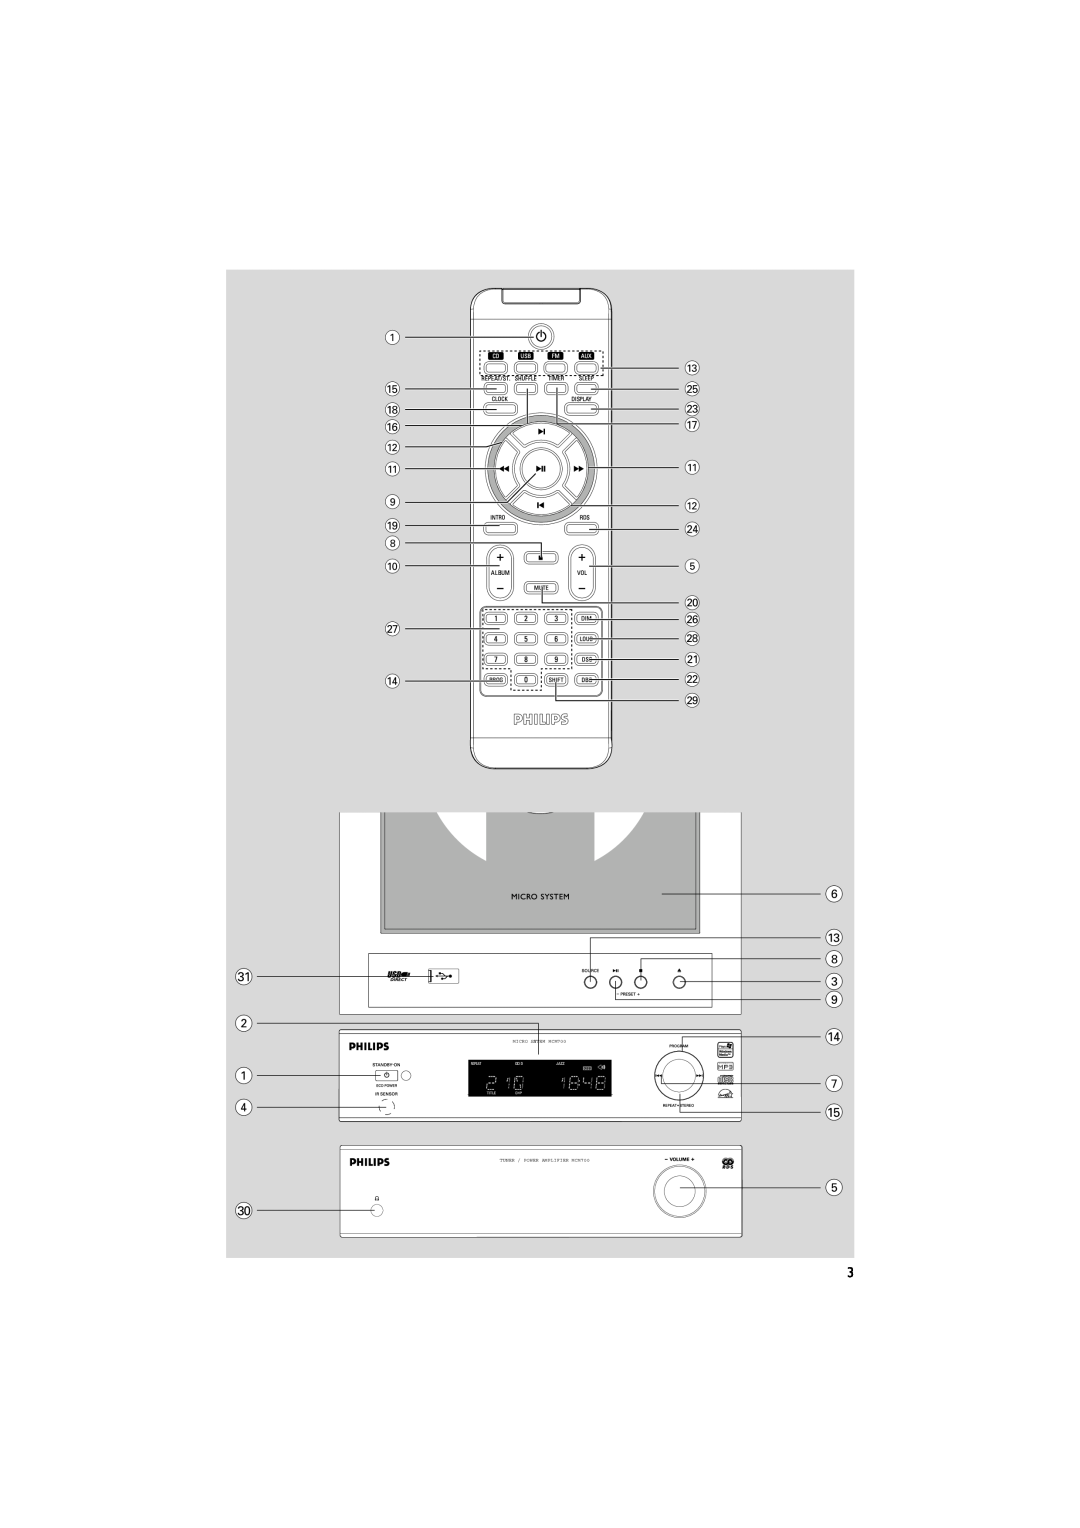 Philips user manual ⁄ 2 1 4 º, 6 # 8 3 9 $ 7 %, MICRO SYSTEM MCM700, TUNER / POWER AMPLIFIER MCM700 